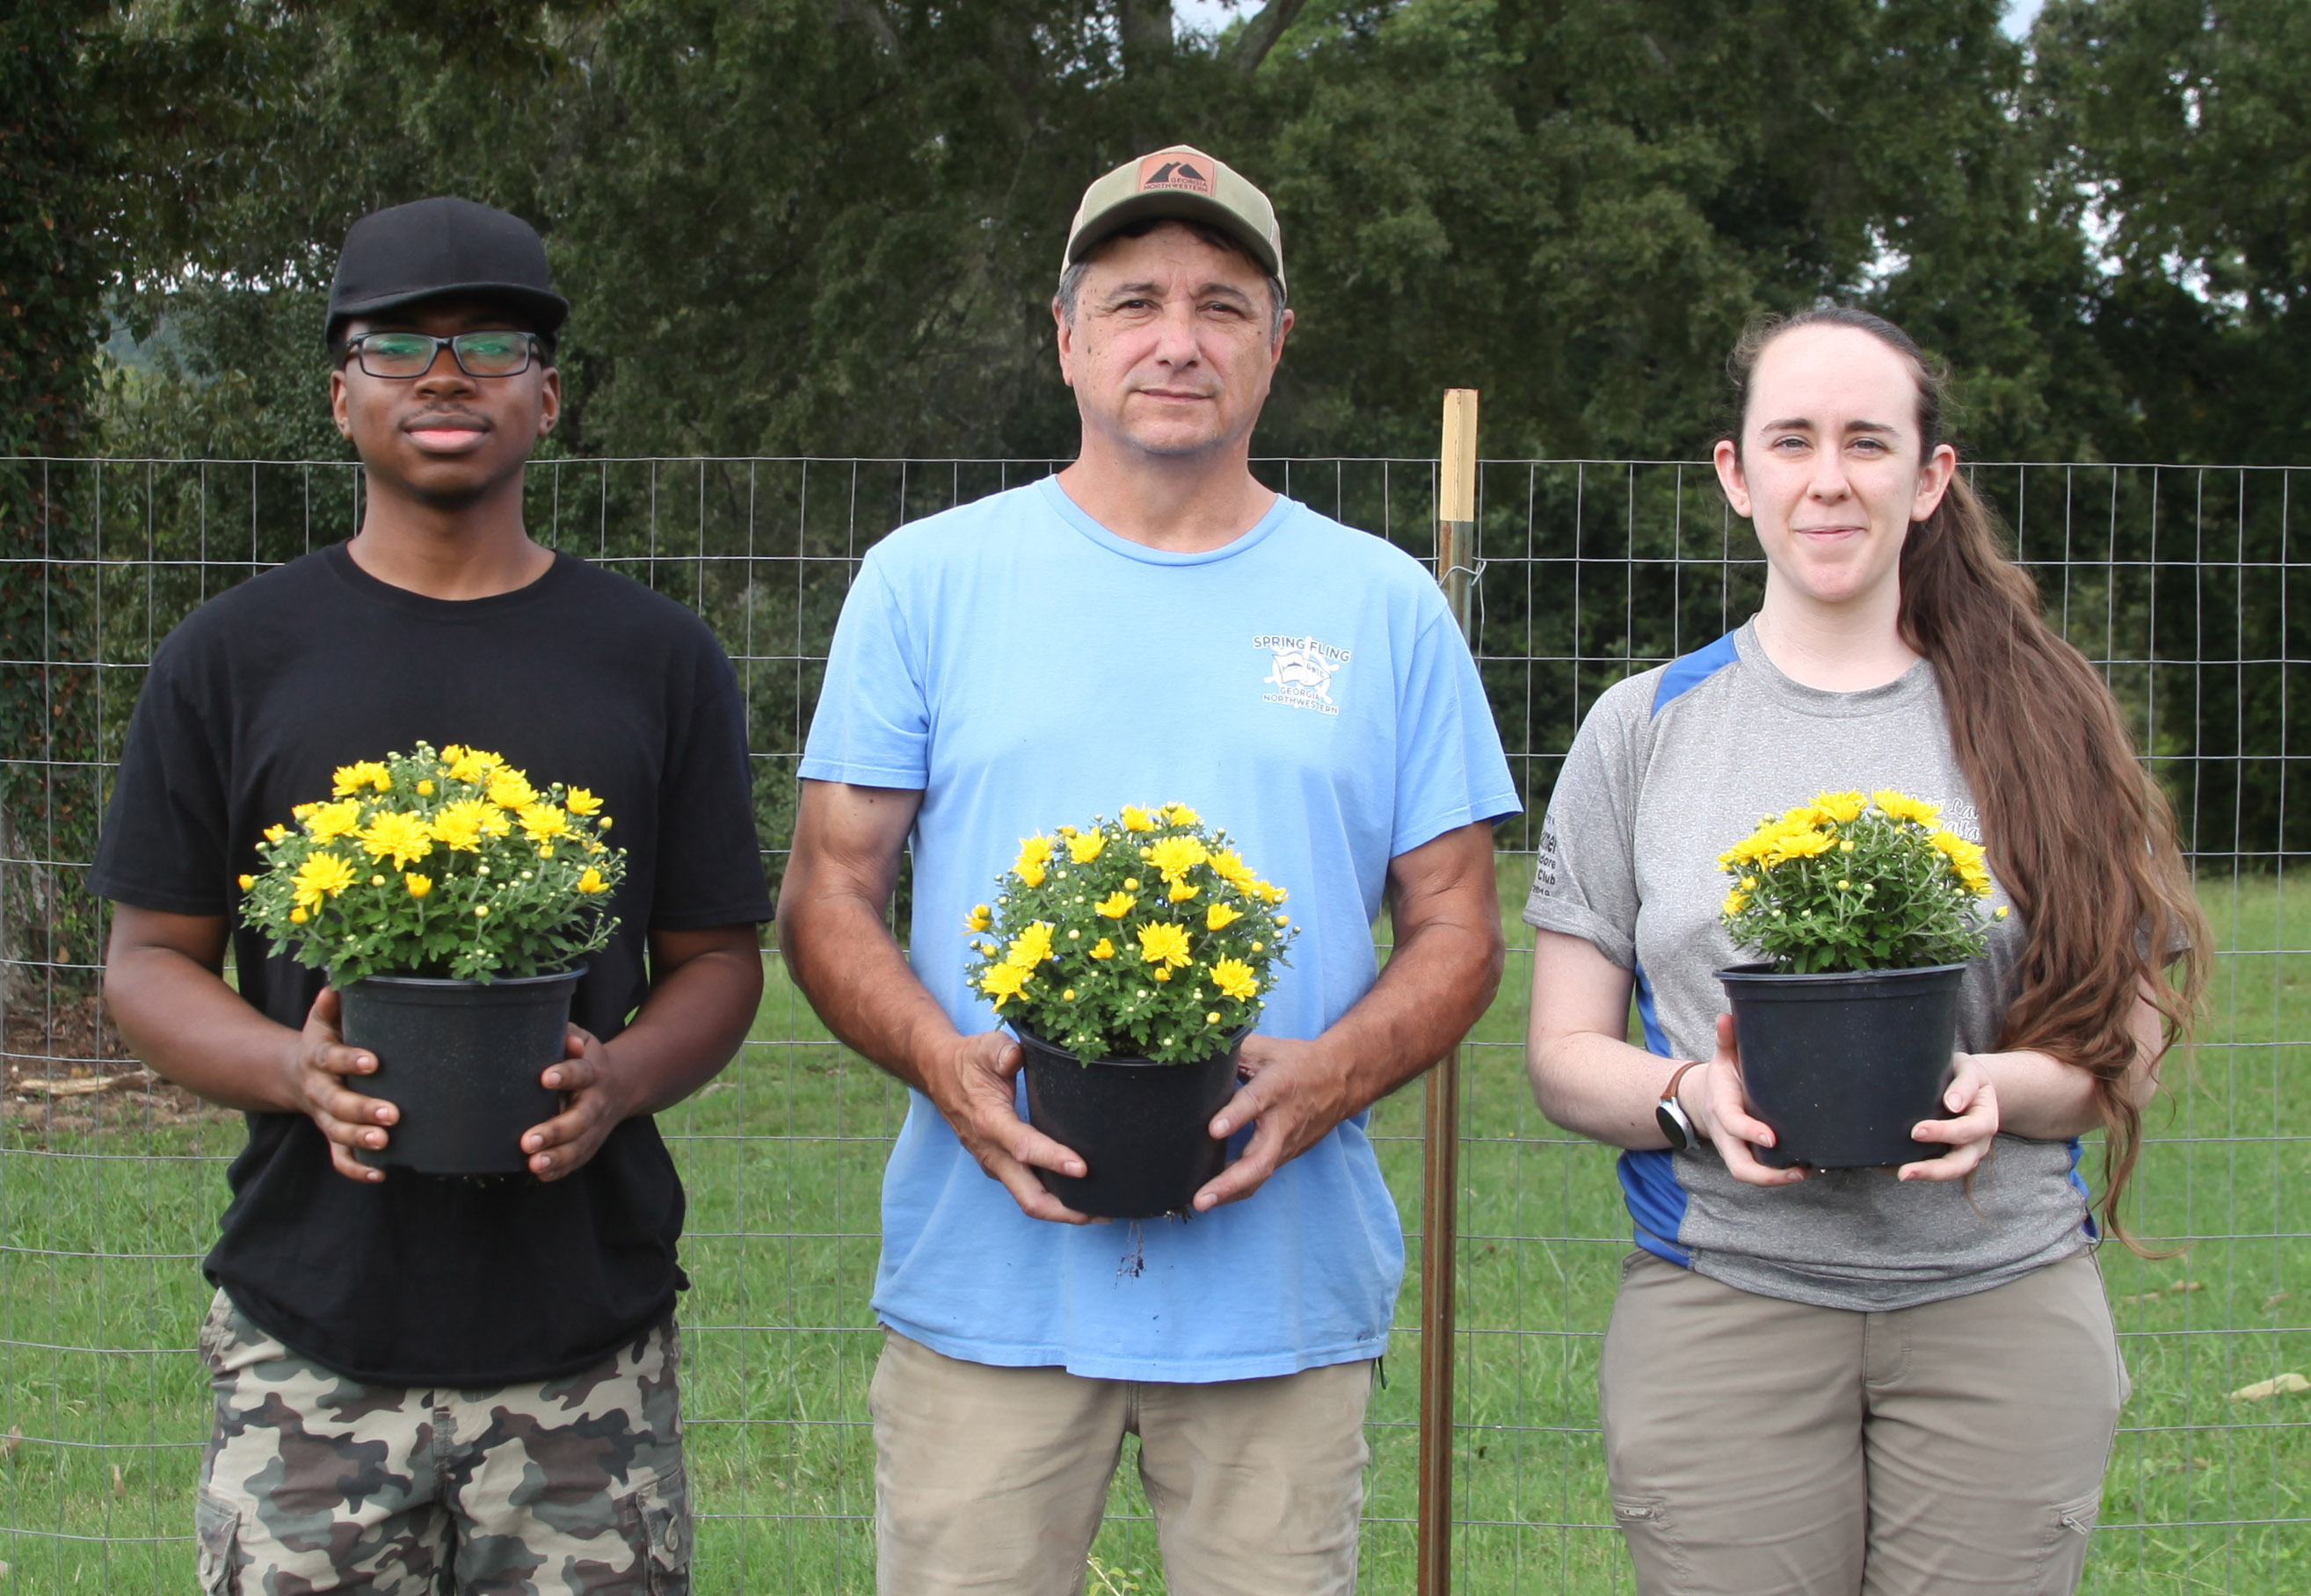 Nick Barton, director of GNTC’s Horticulture program (center), and Horticulture students Timothy Roberts (left) and Amber Broome prepare for the Fall Mum Sale.